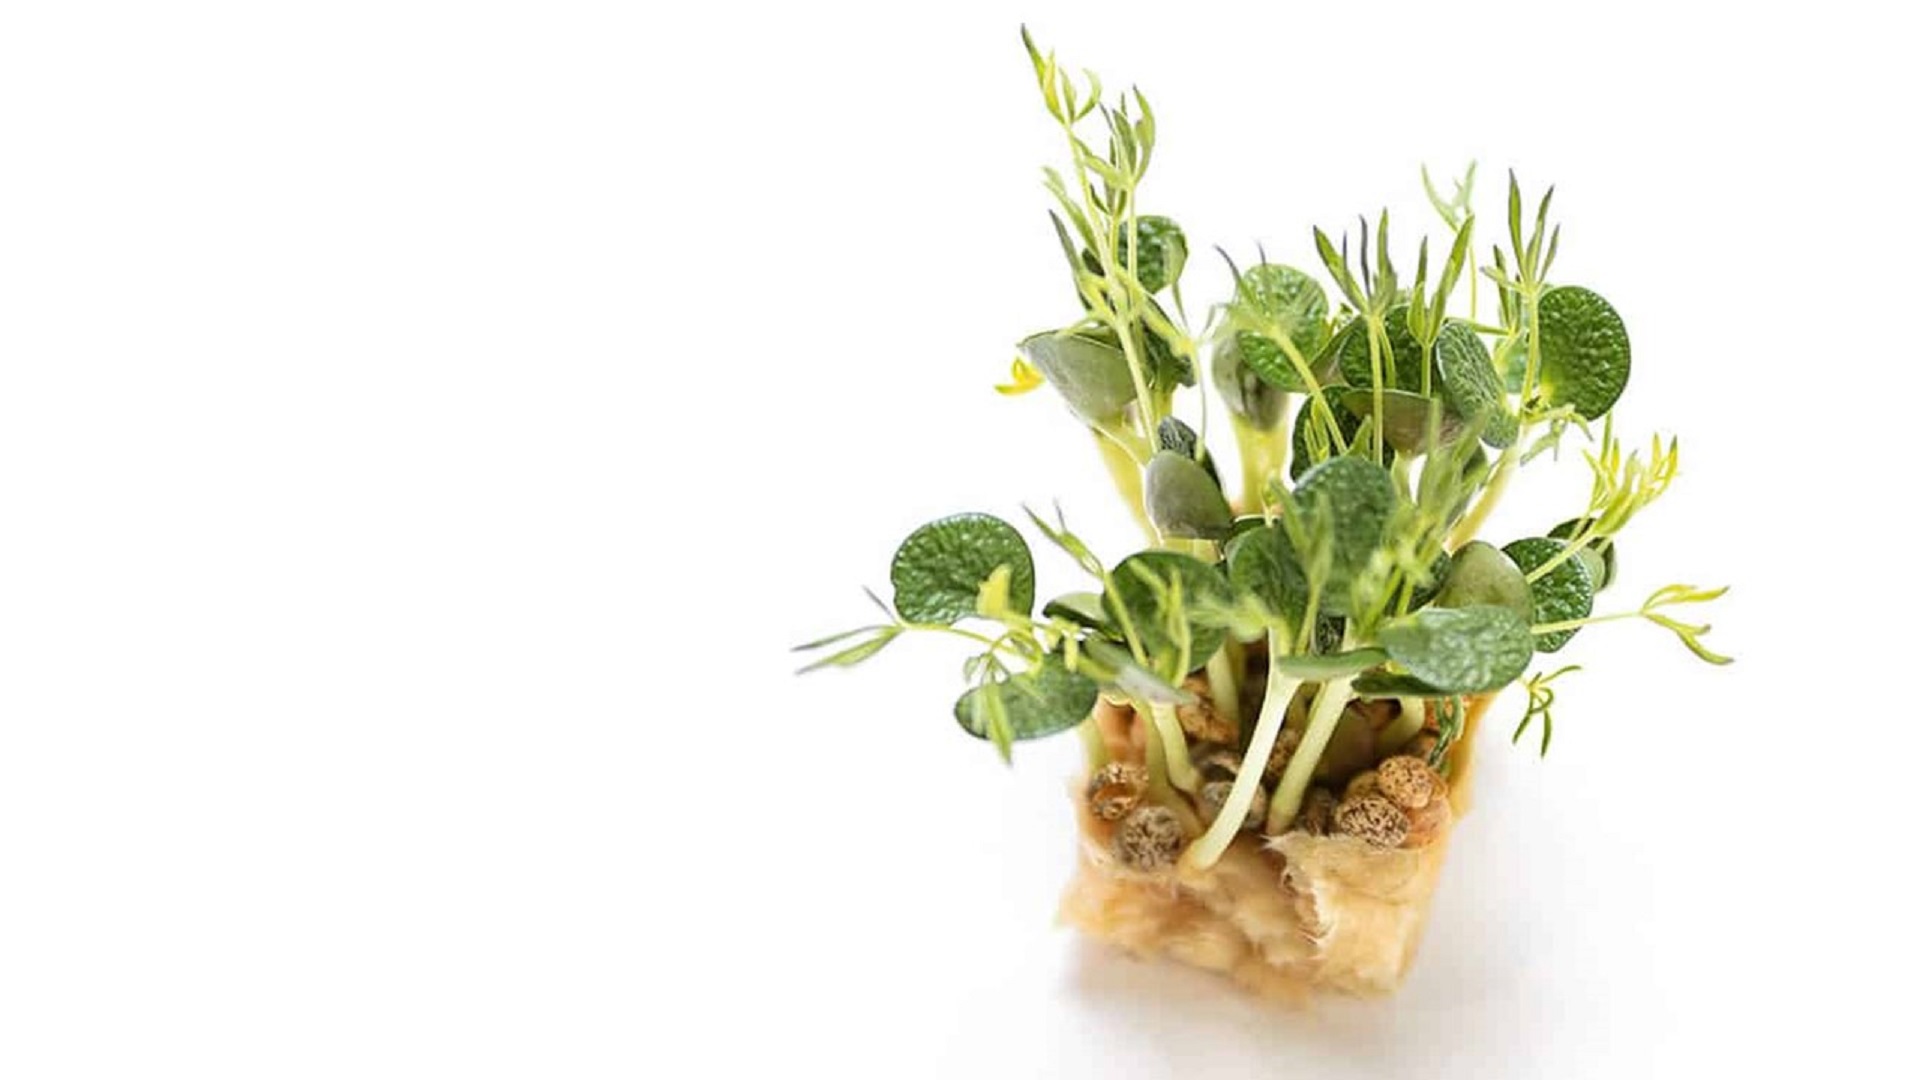 The Lupine Cress is versatile in use